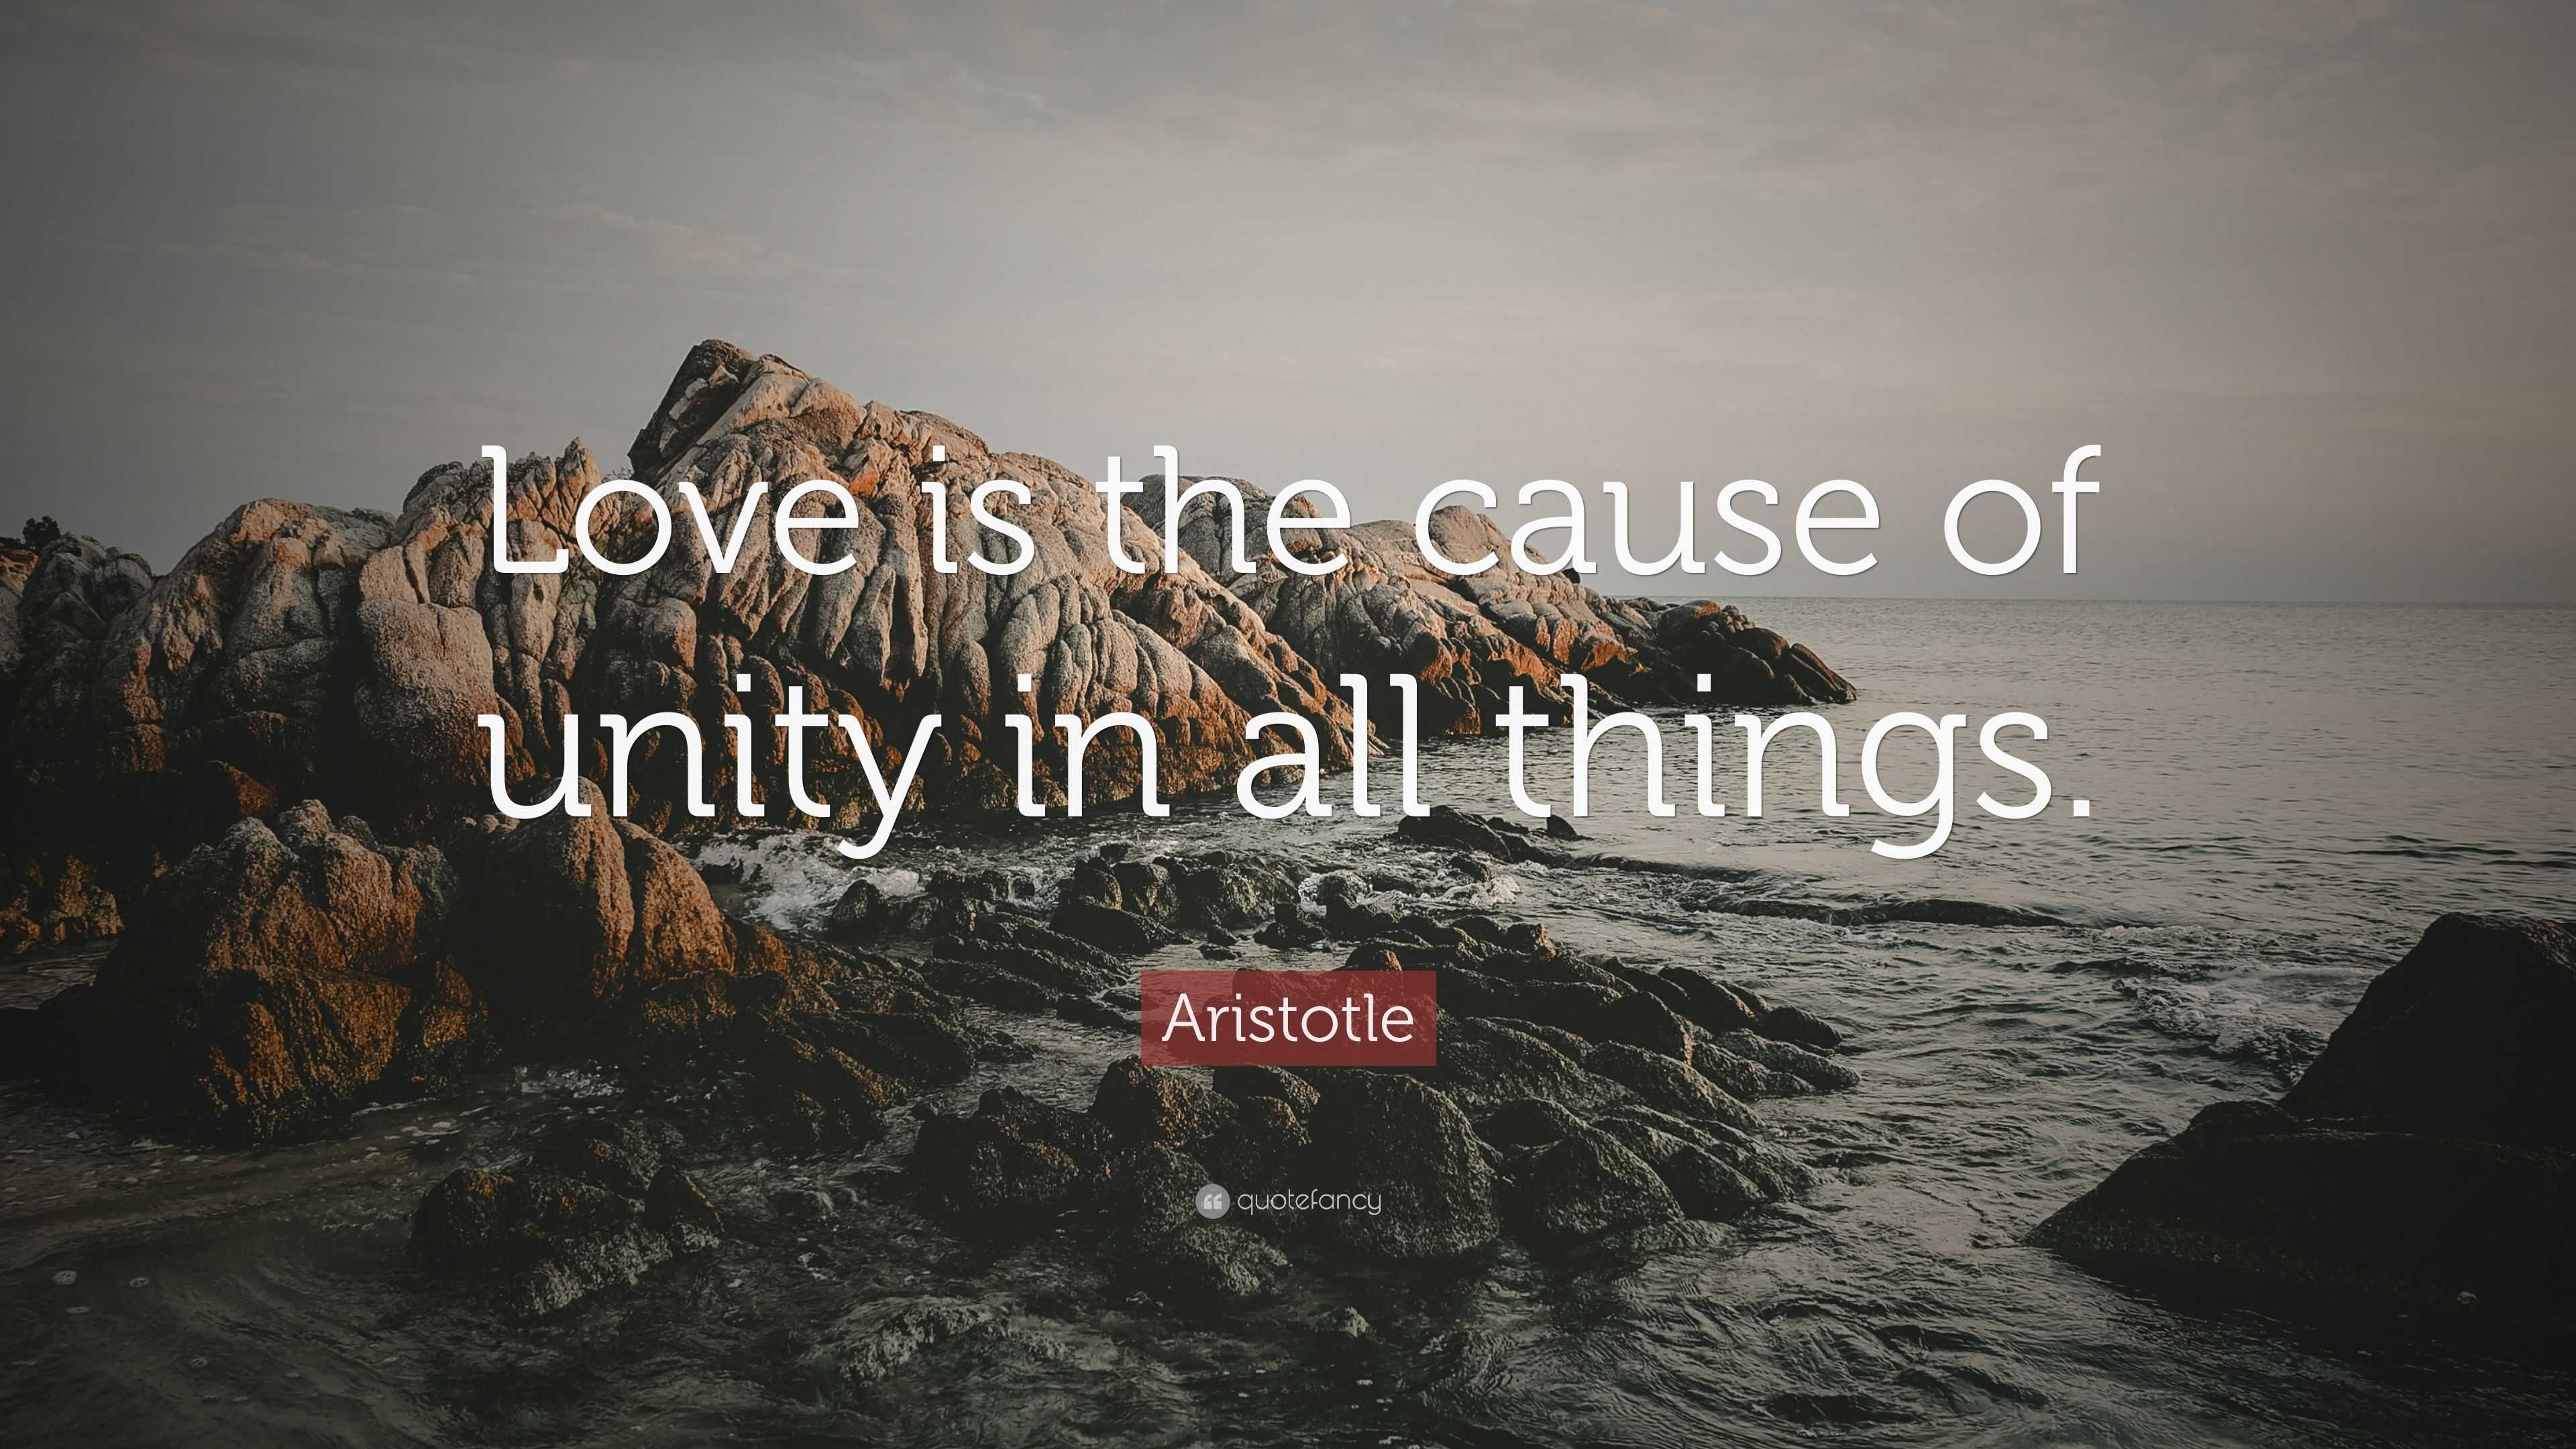 Aristotle Quote “Love is the cause of unity in all things.”